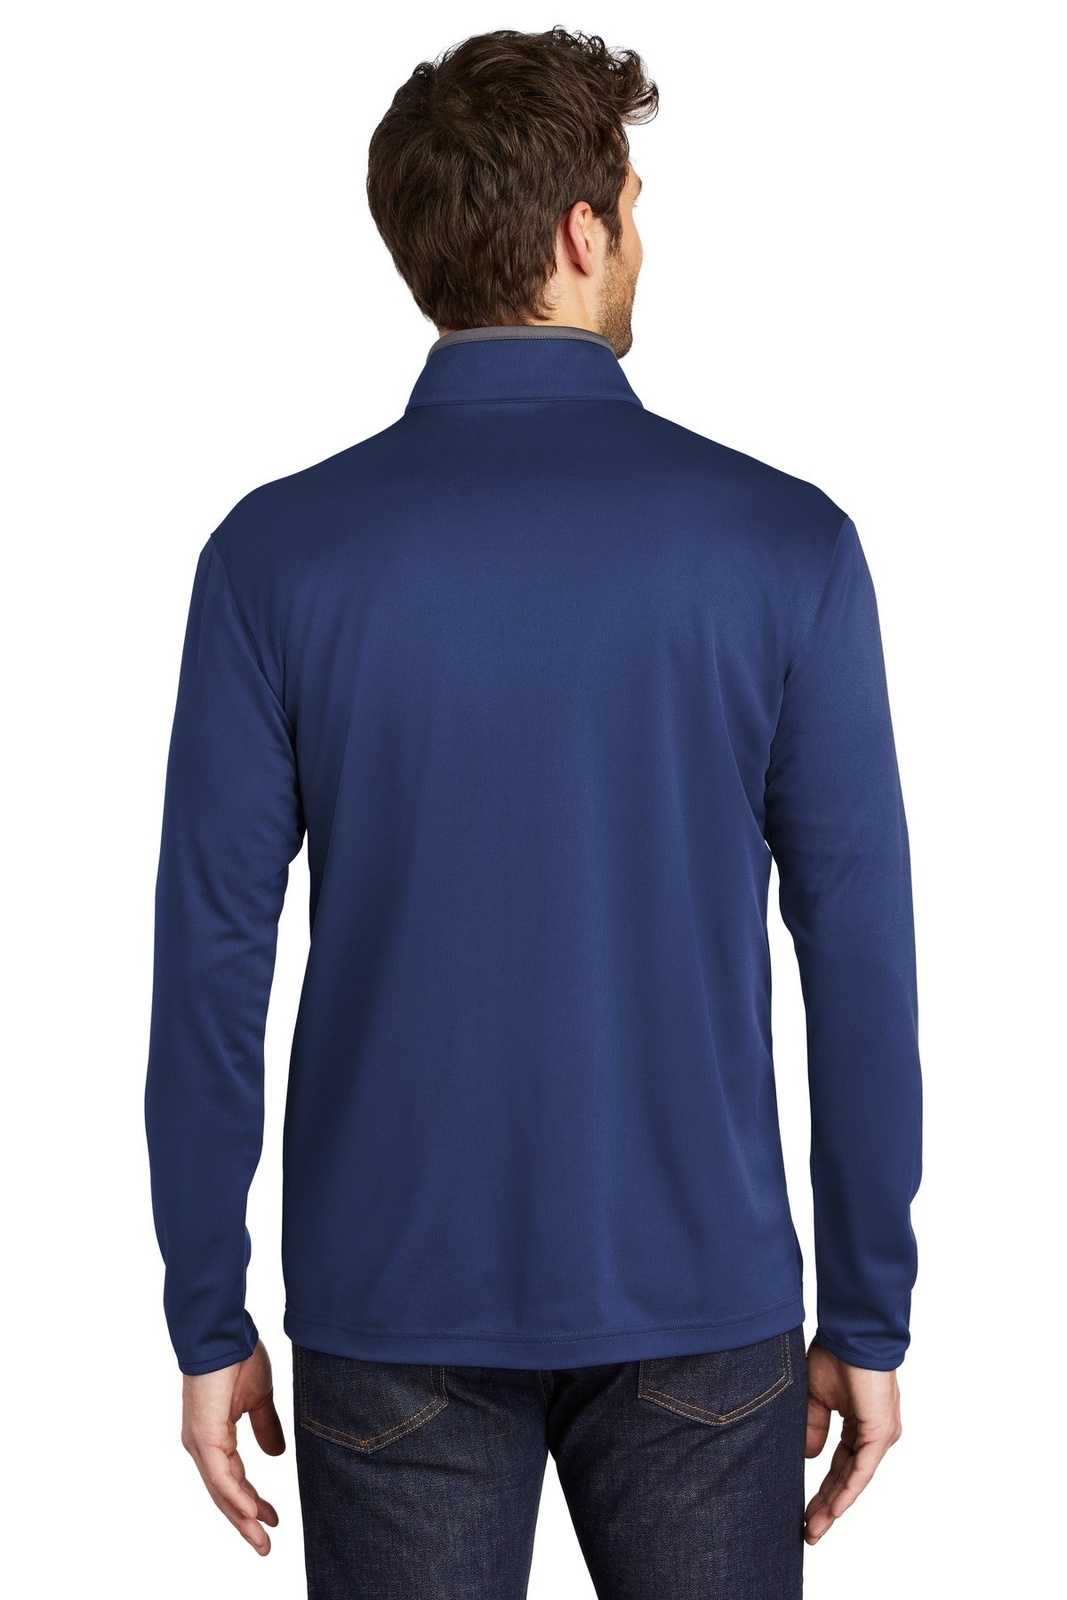 Port Authority K584 Silk Touch Performance 1/4-Zip K584Royal Steel Gray - HIT a Double - 1